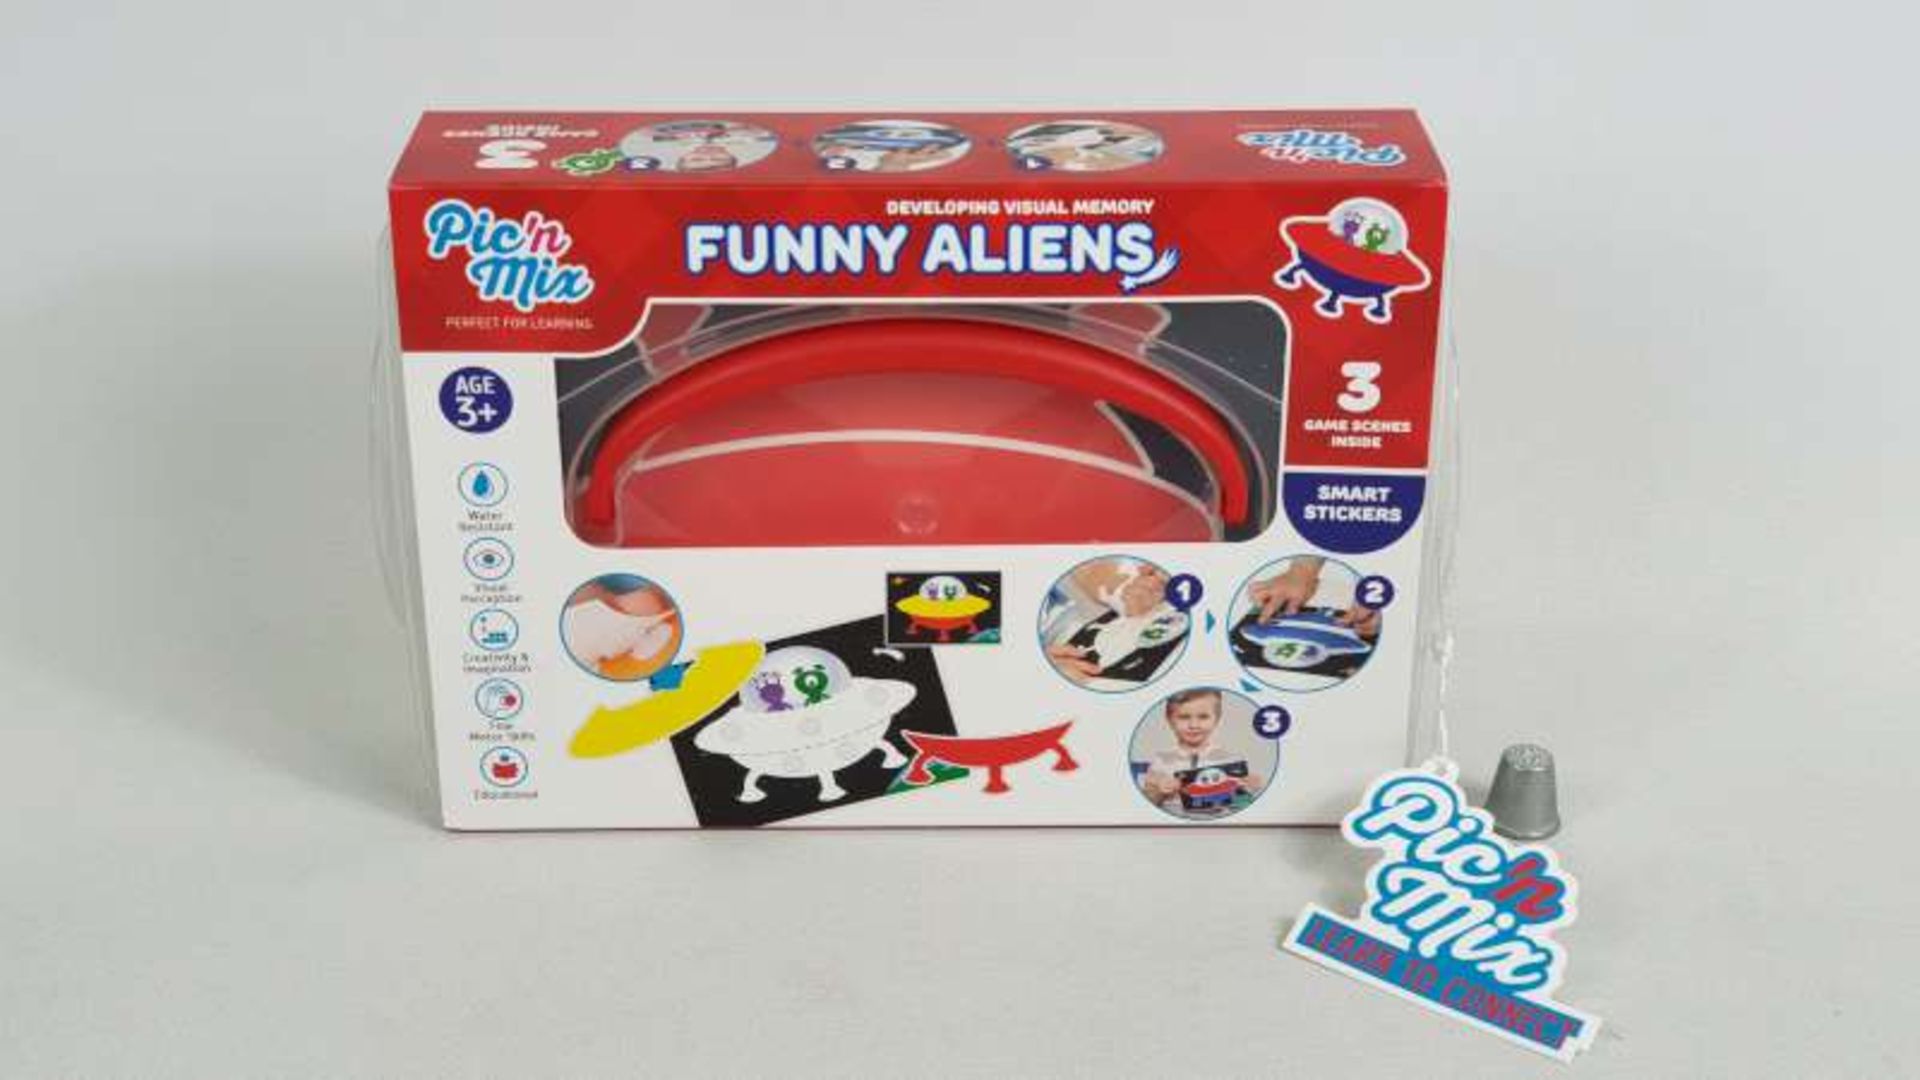 24 X BRAND NEW BOXED PIC N MIX ALIENS DEVELOPING VISUAL MEMORY EDUCATIONAL LEARNING GAMES IN 1 BOX